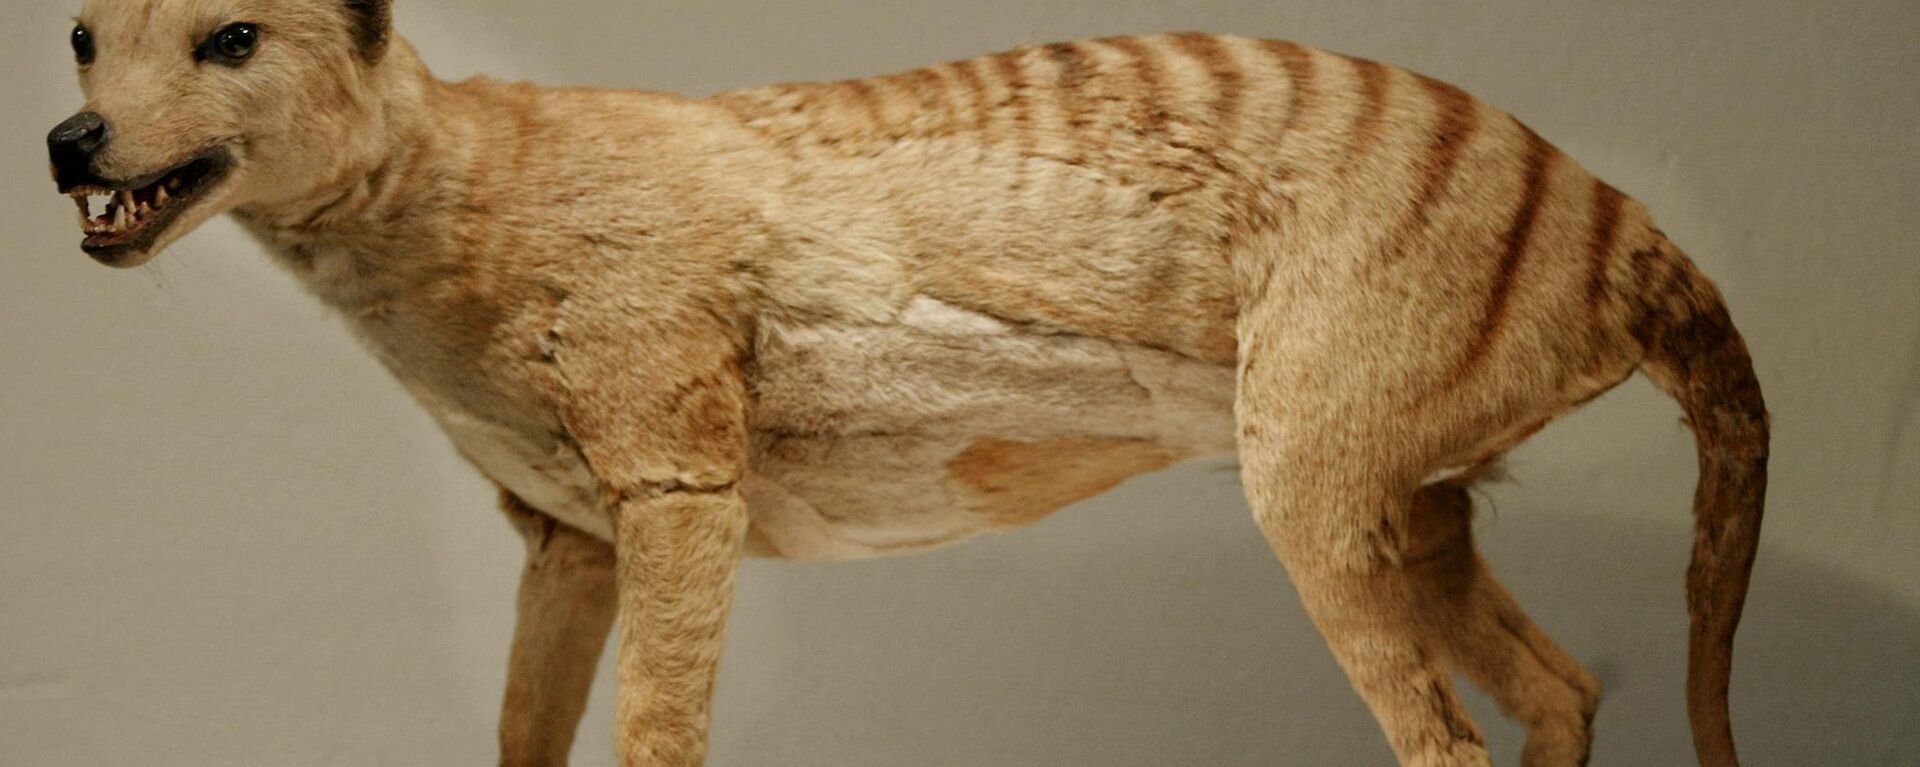 A Tasmanian tiger (Thylacine), which was declared extinct in 1936, is displayed at the Australian Museum in Sydney, 25 May 2002.   - Sputnik International, 1920, 05.12.2022